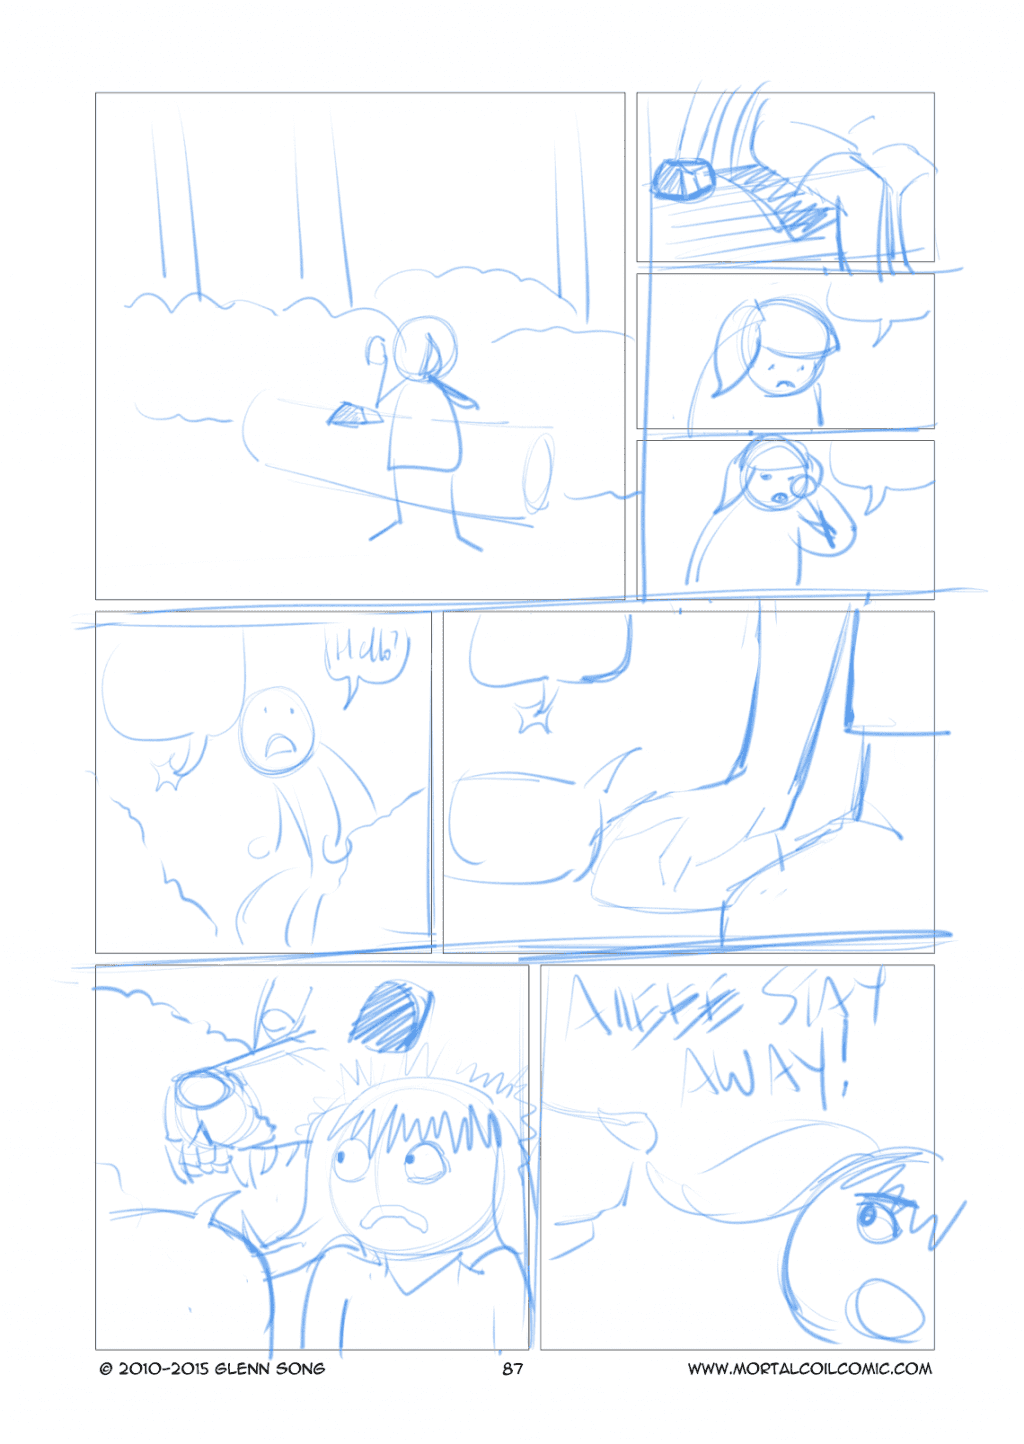 A Voice in the Woods - 4 Storyboards